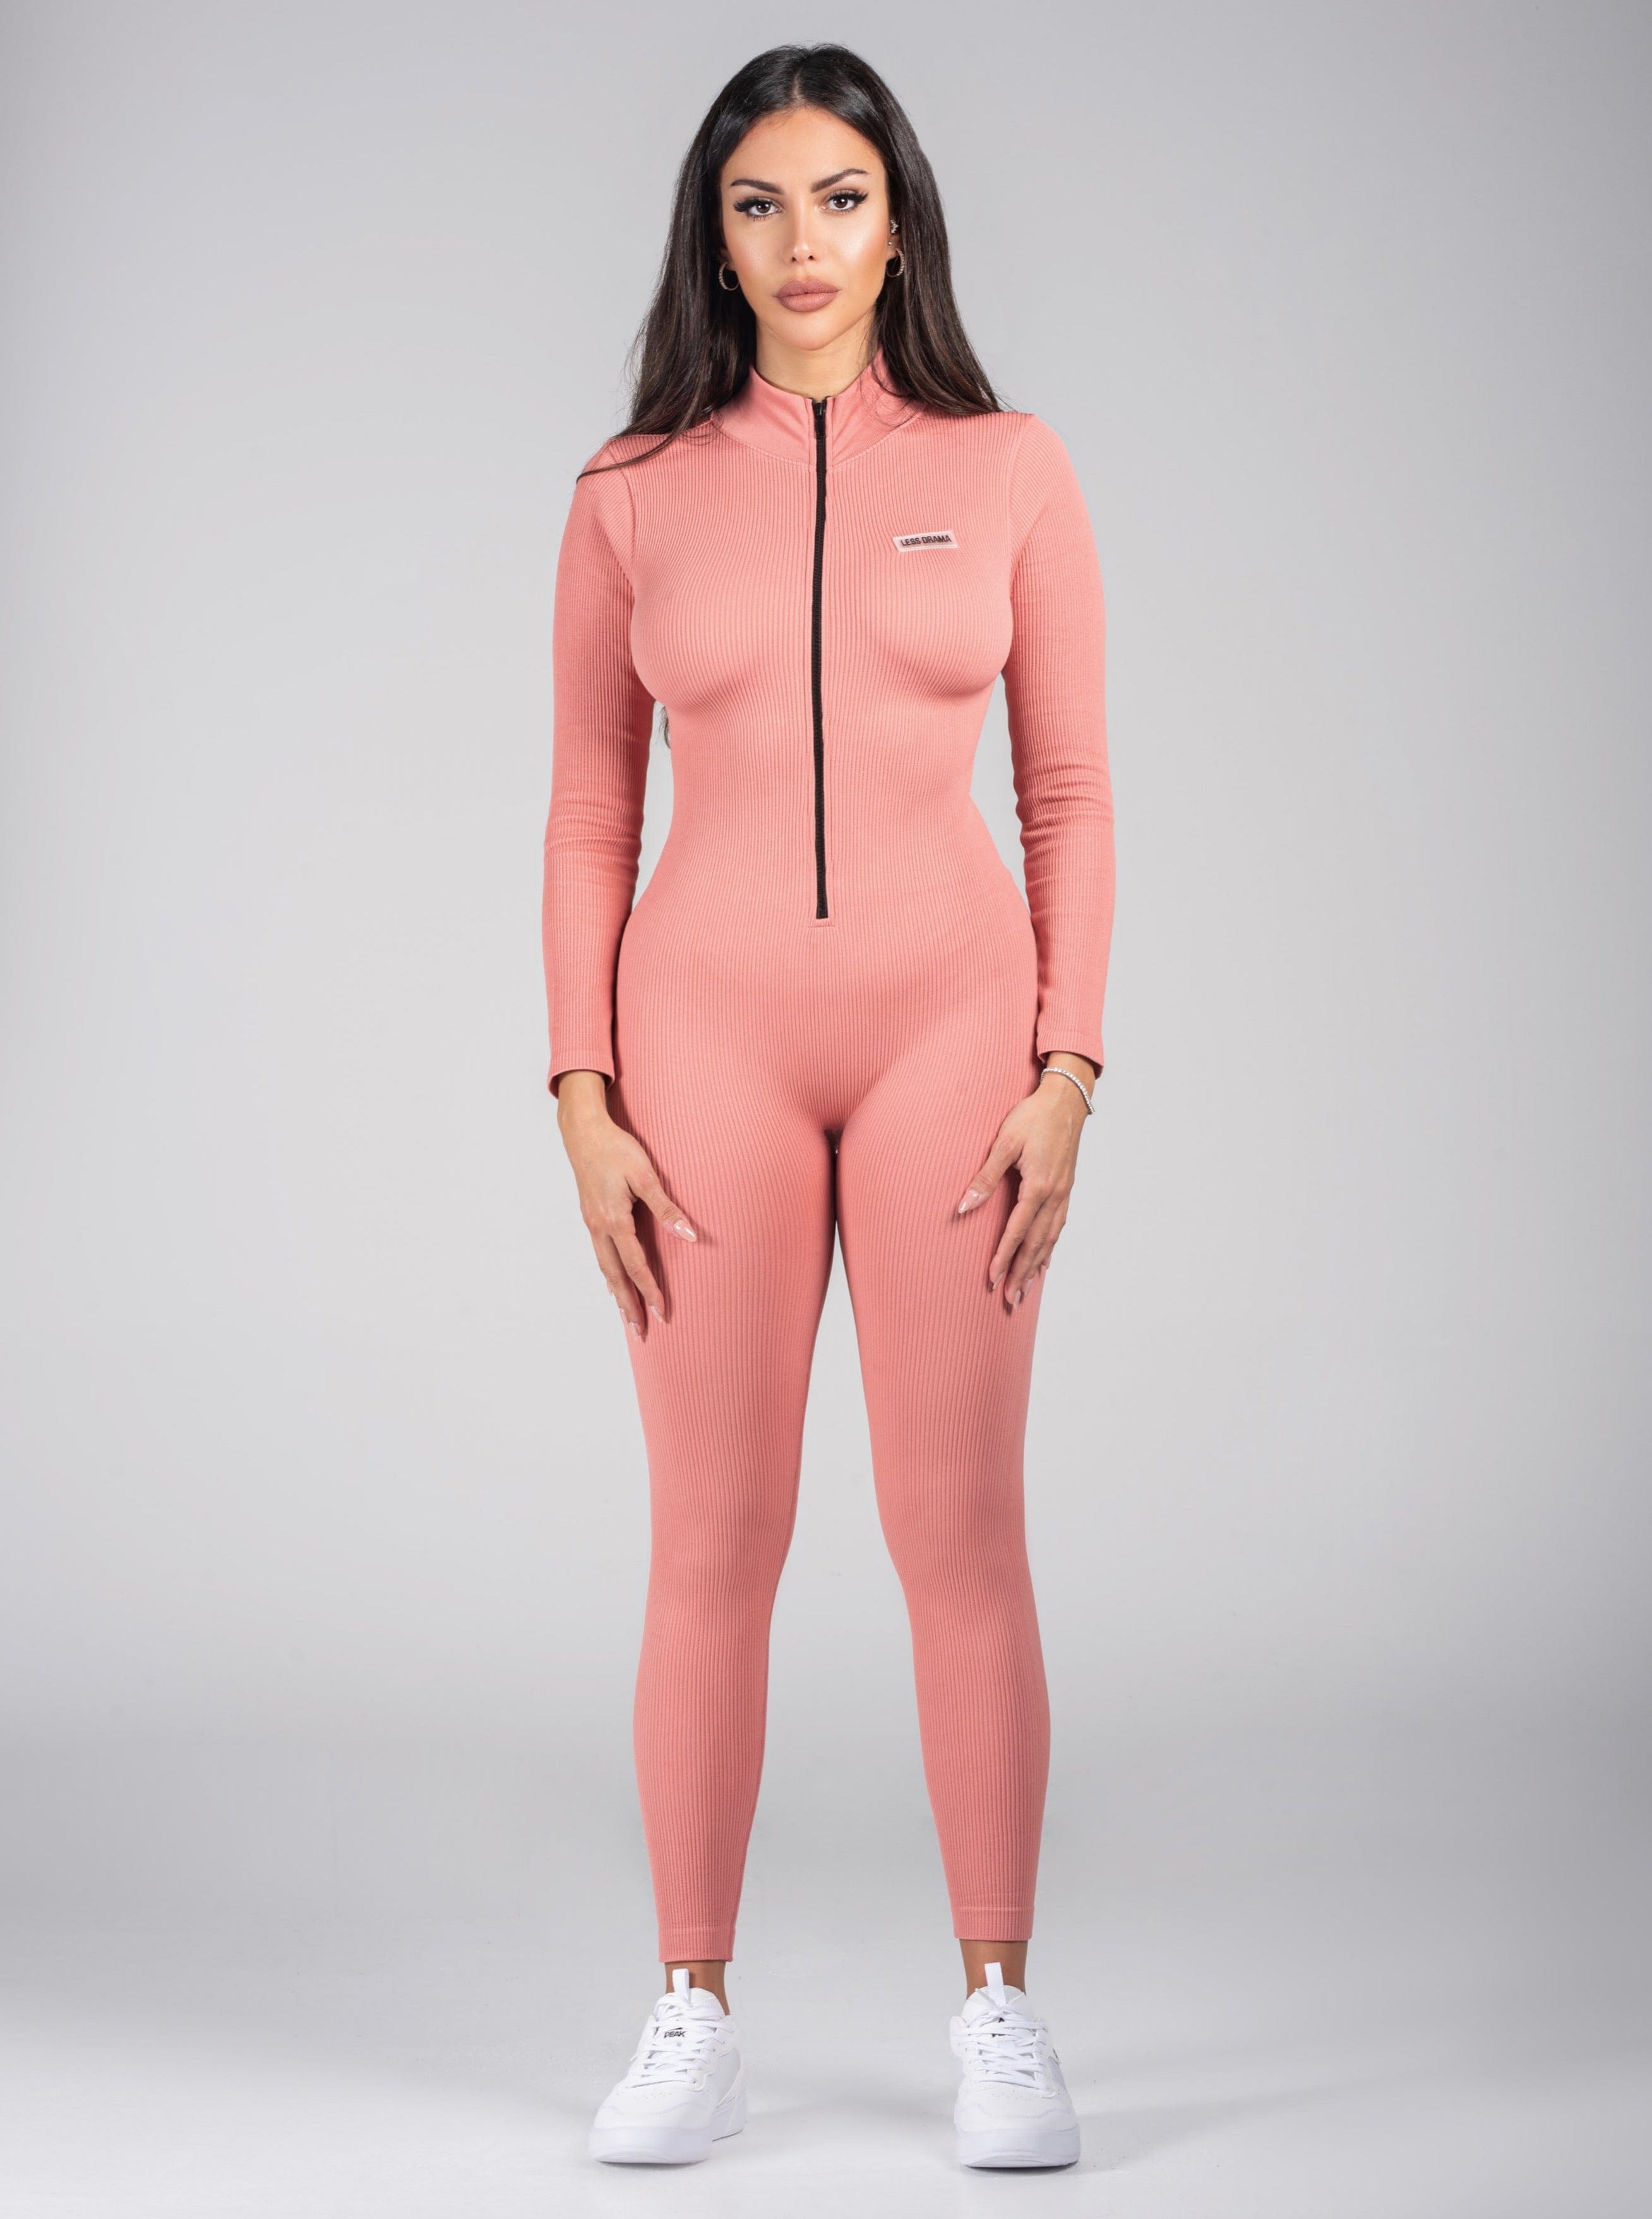 long sleeve pink jumpsuit for womens